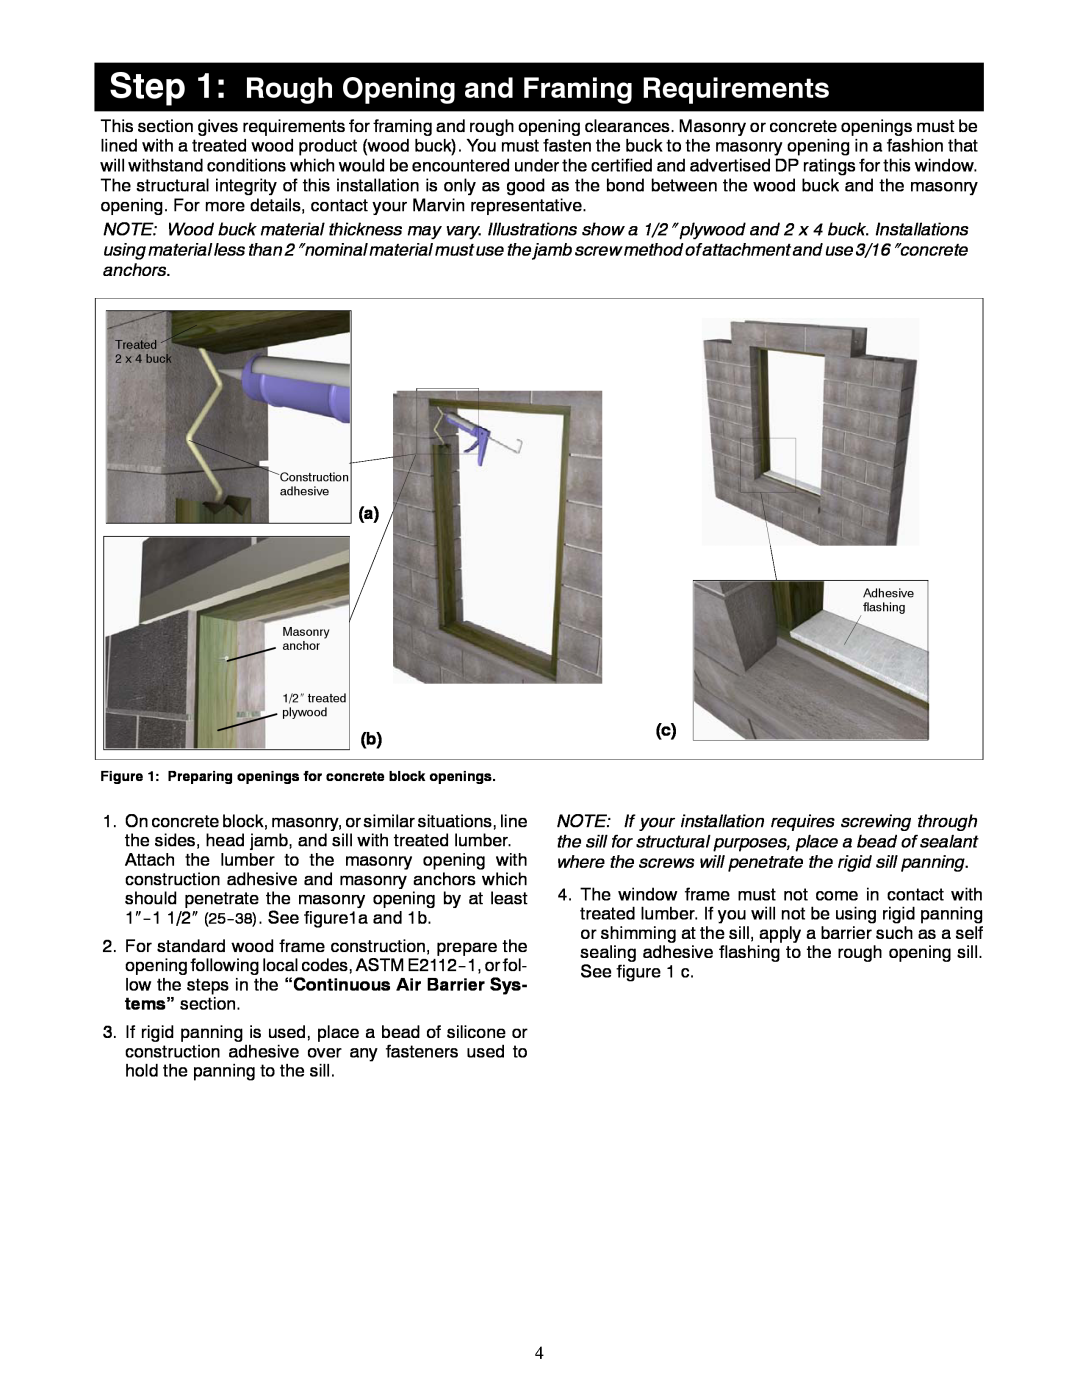 Marvin Window manual Rough Opening and Framing Requirements 